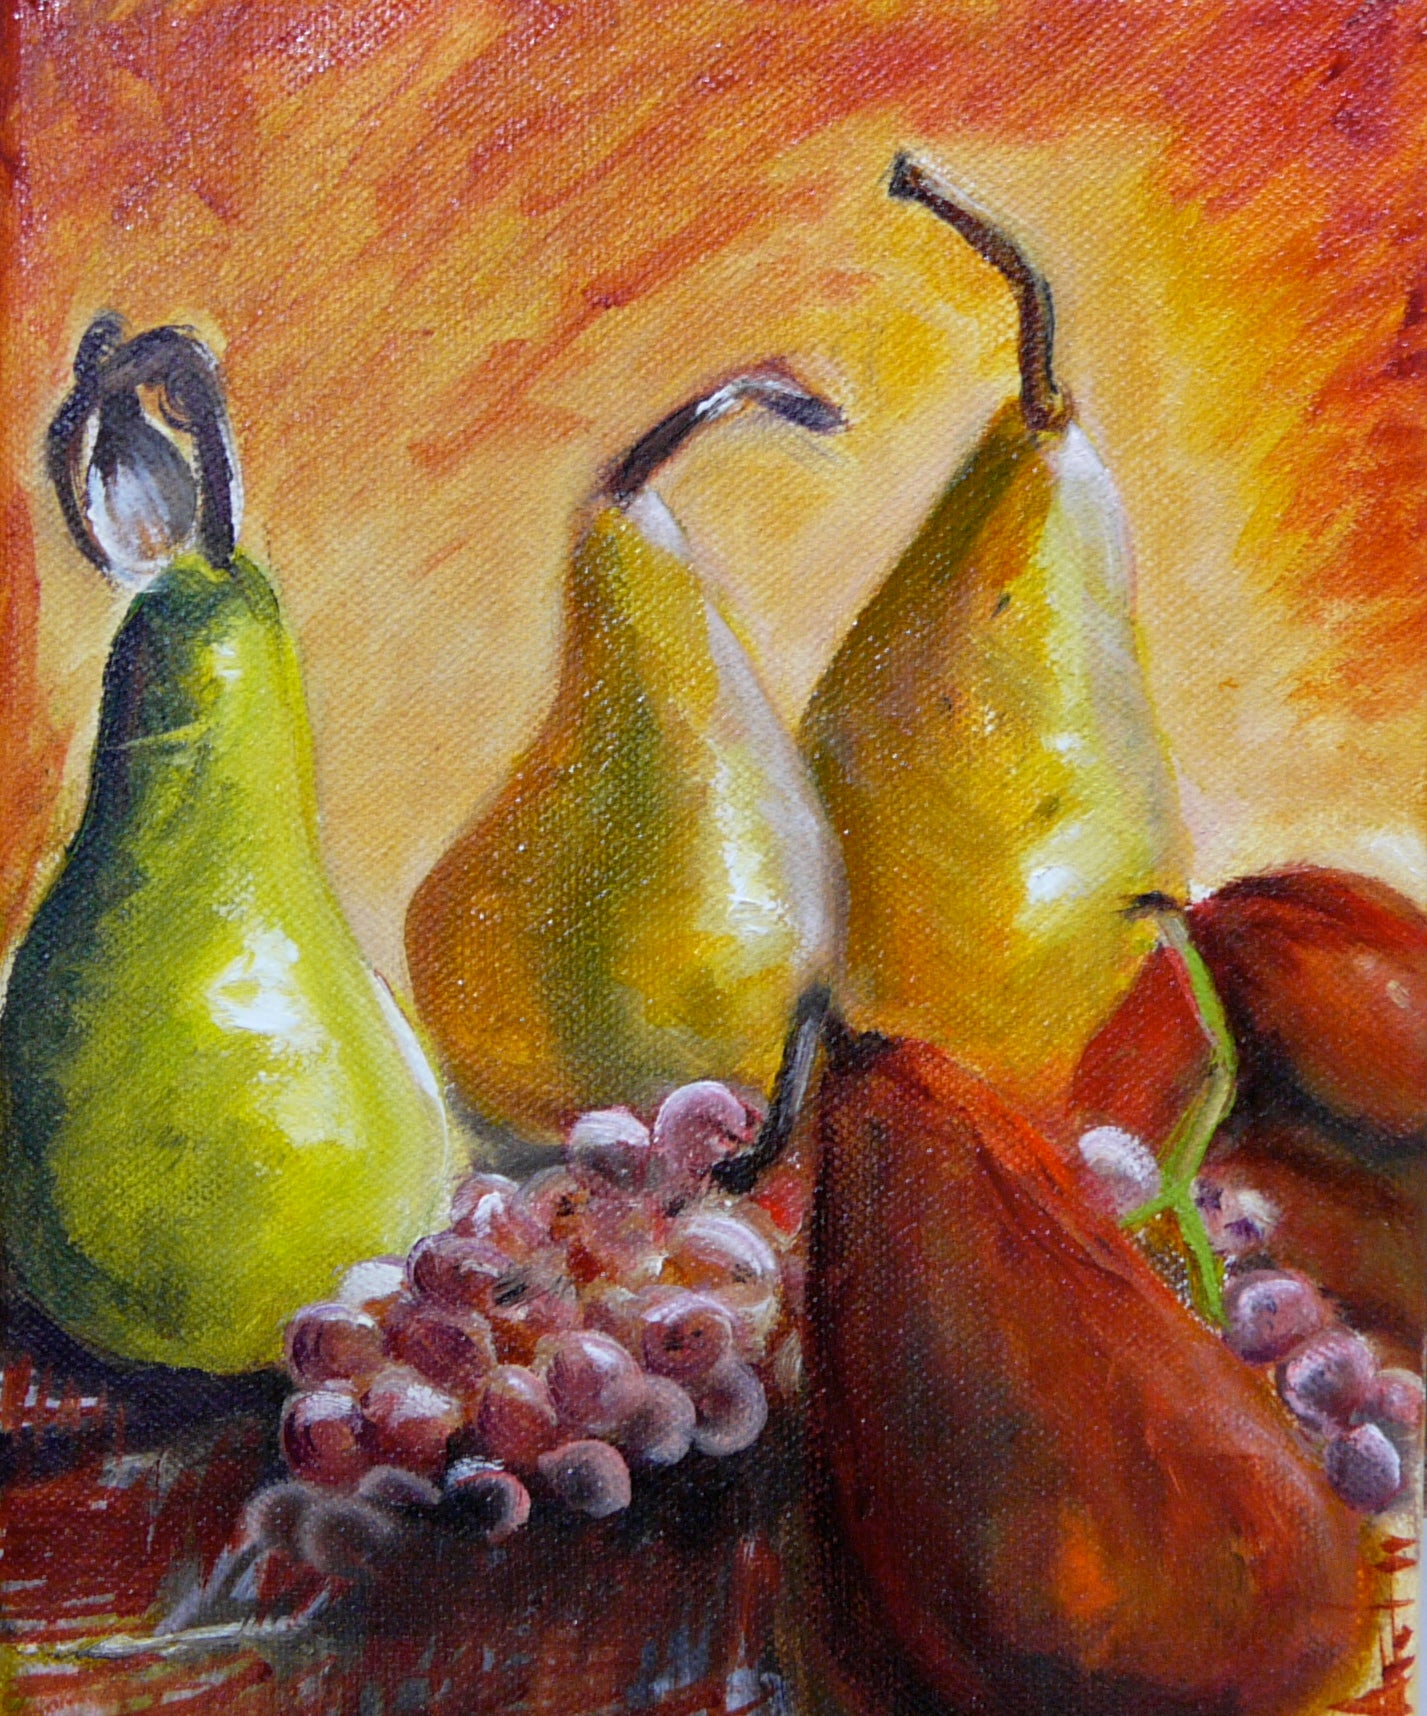 Small Pears and Grapes - Artistic Transfer, LLC